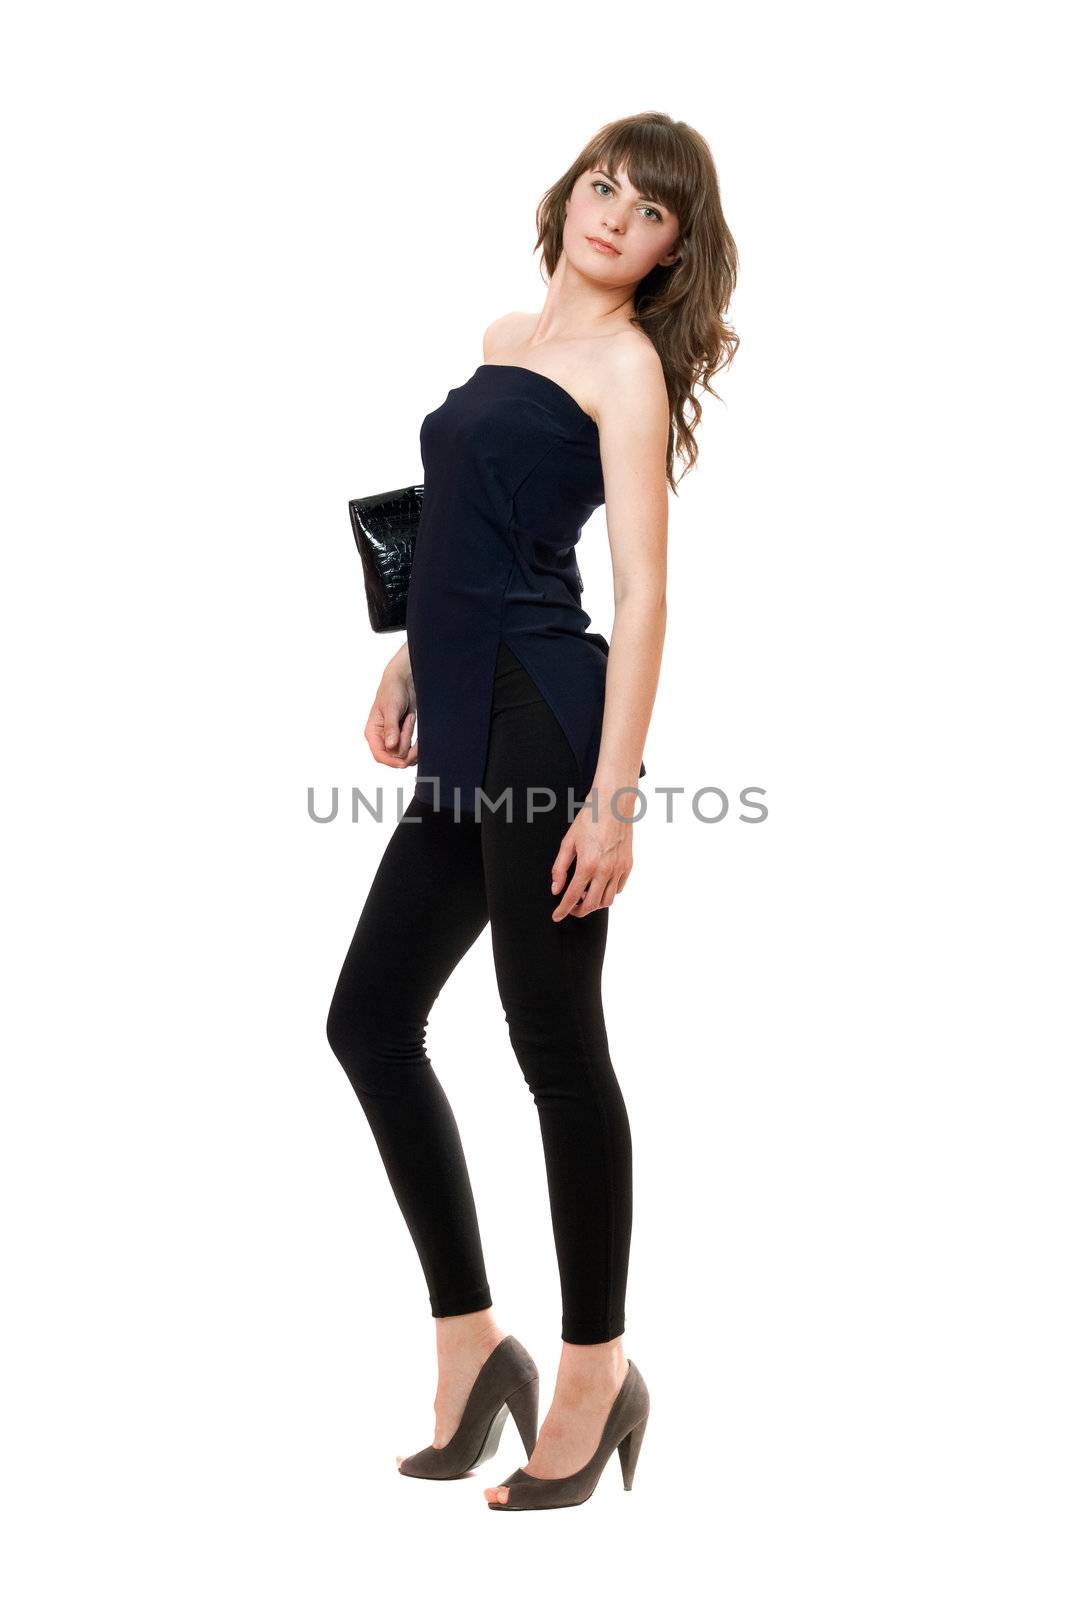 Pretty girl in a black leggings. Isolated on white